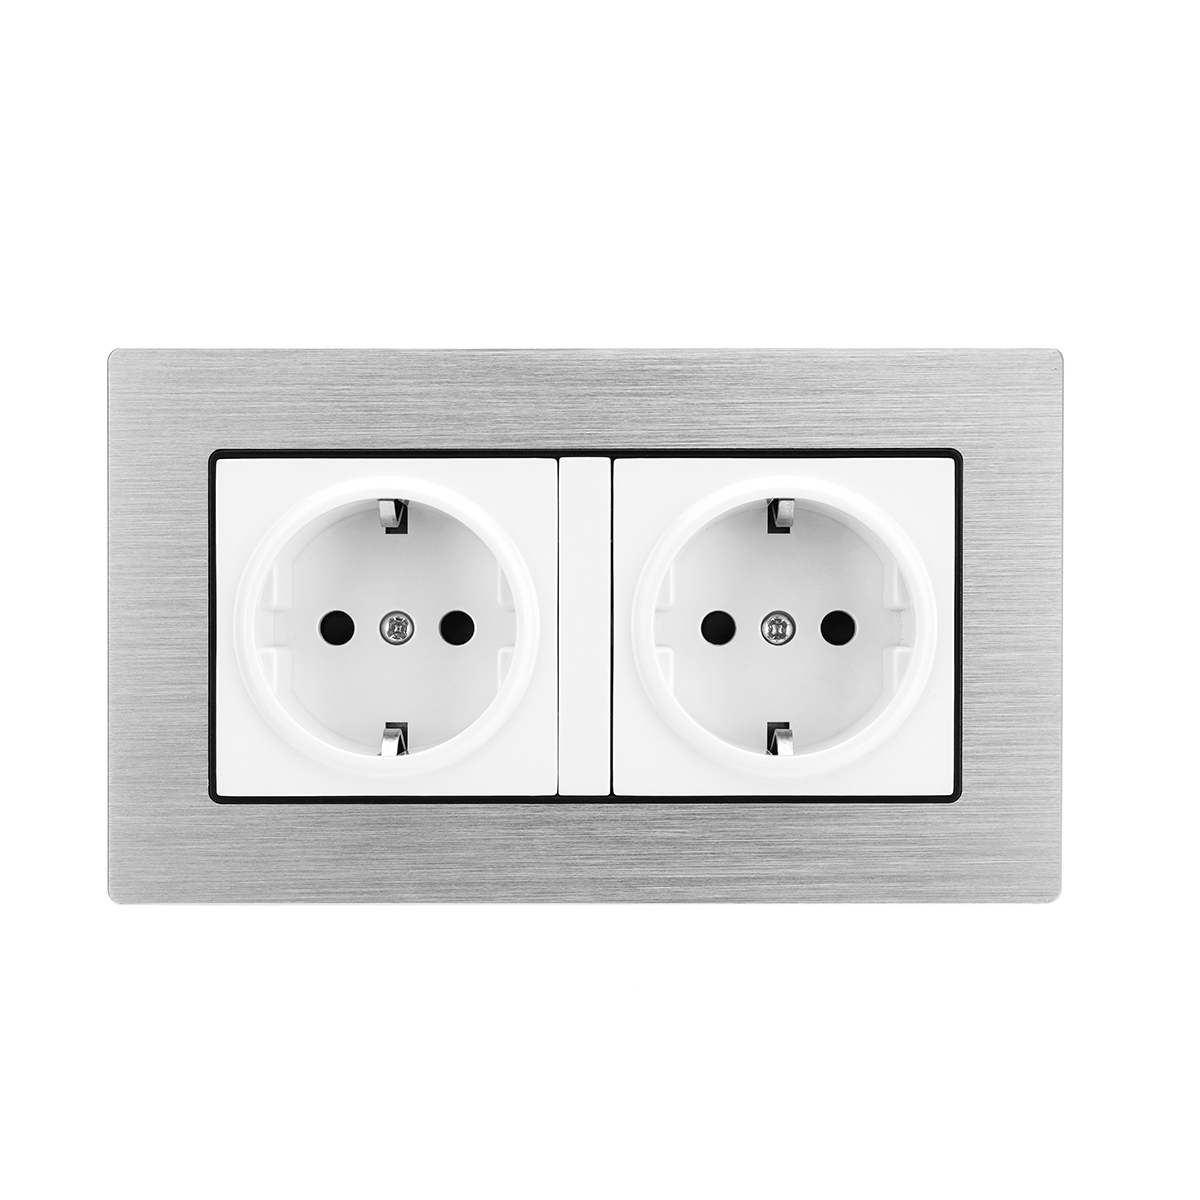 

16A AC110V-250V Wall Double Switch Socket Power Outlet Panel Adapter EU